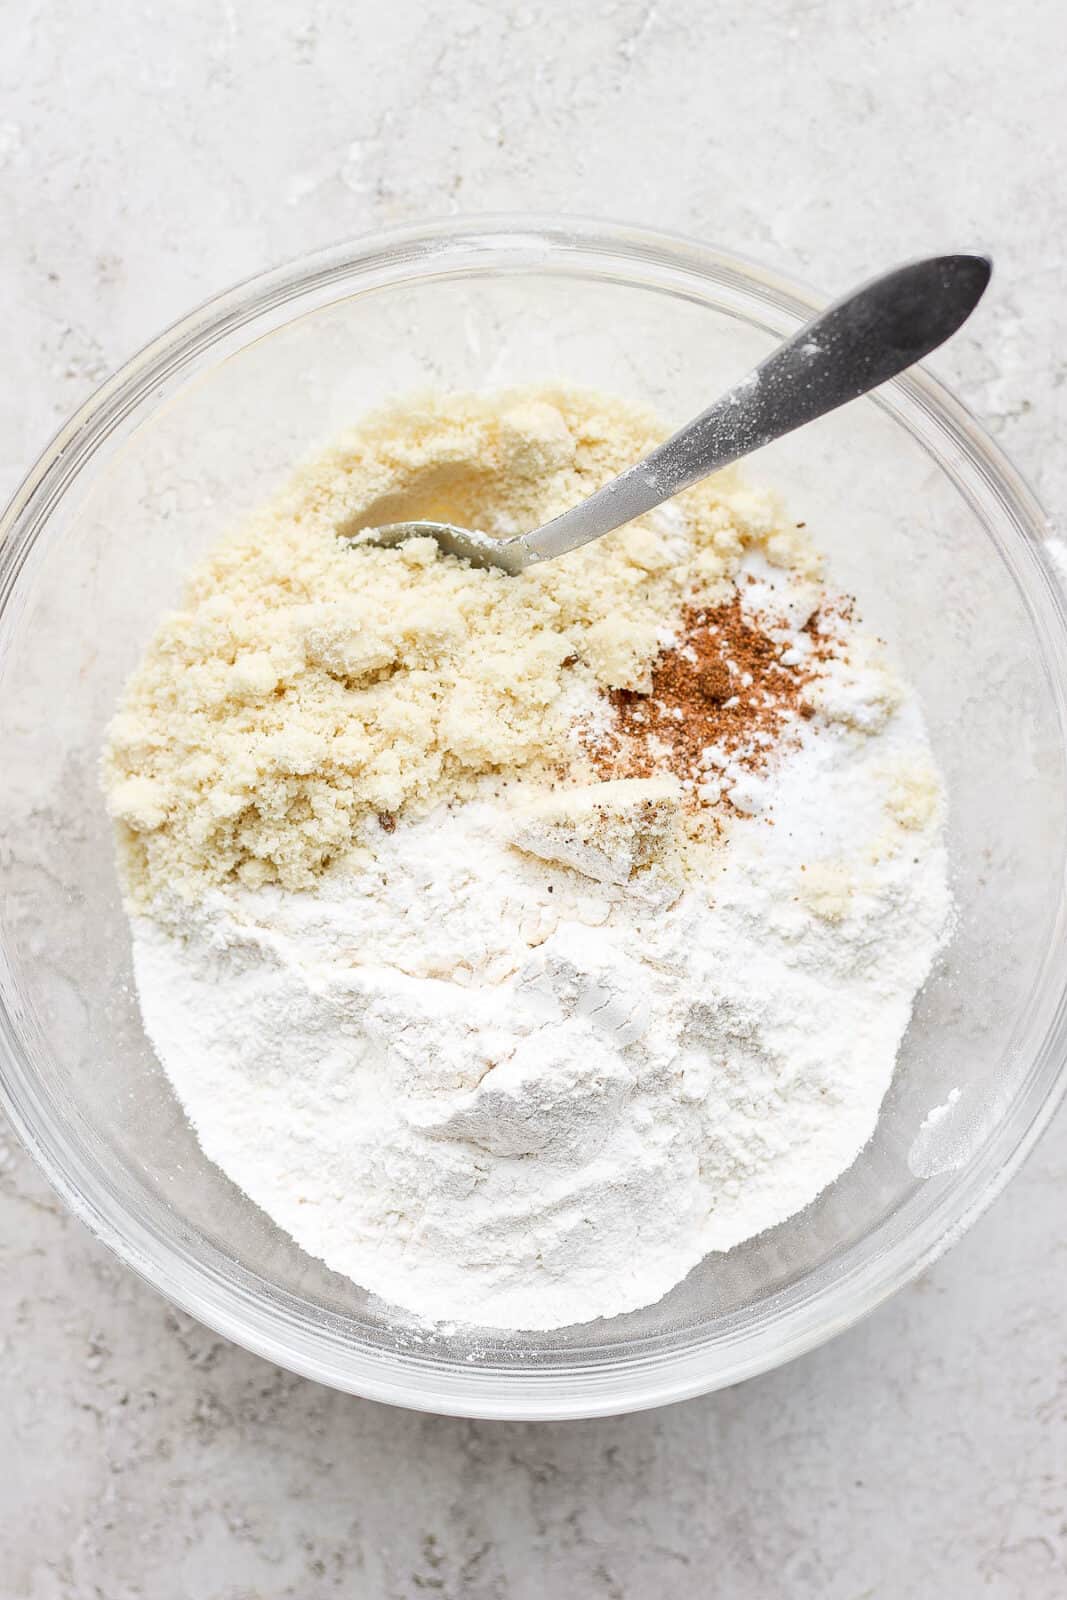 Dry ingredients for almond flour sugar cookies in a mixing bowl.